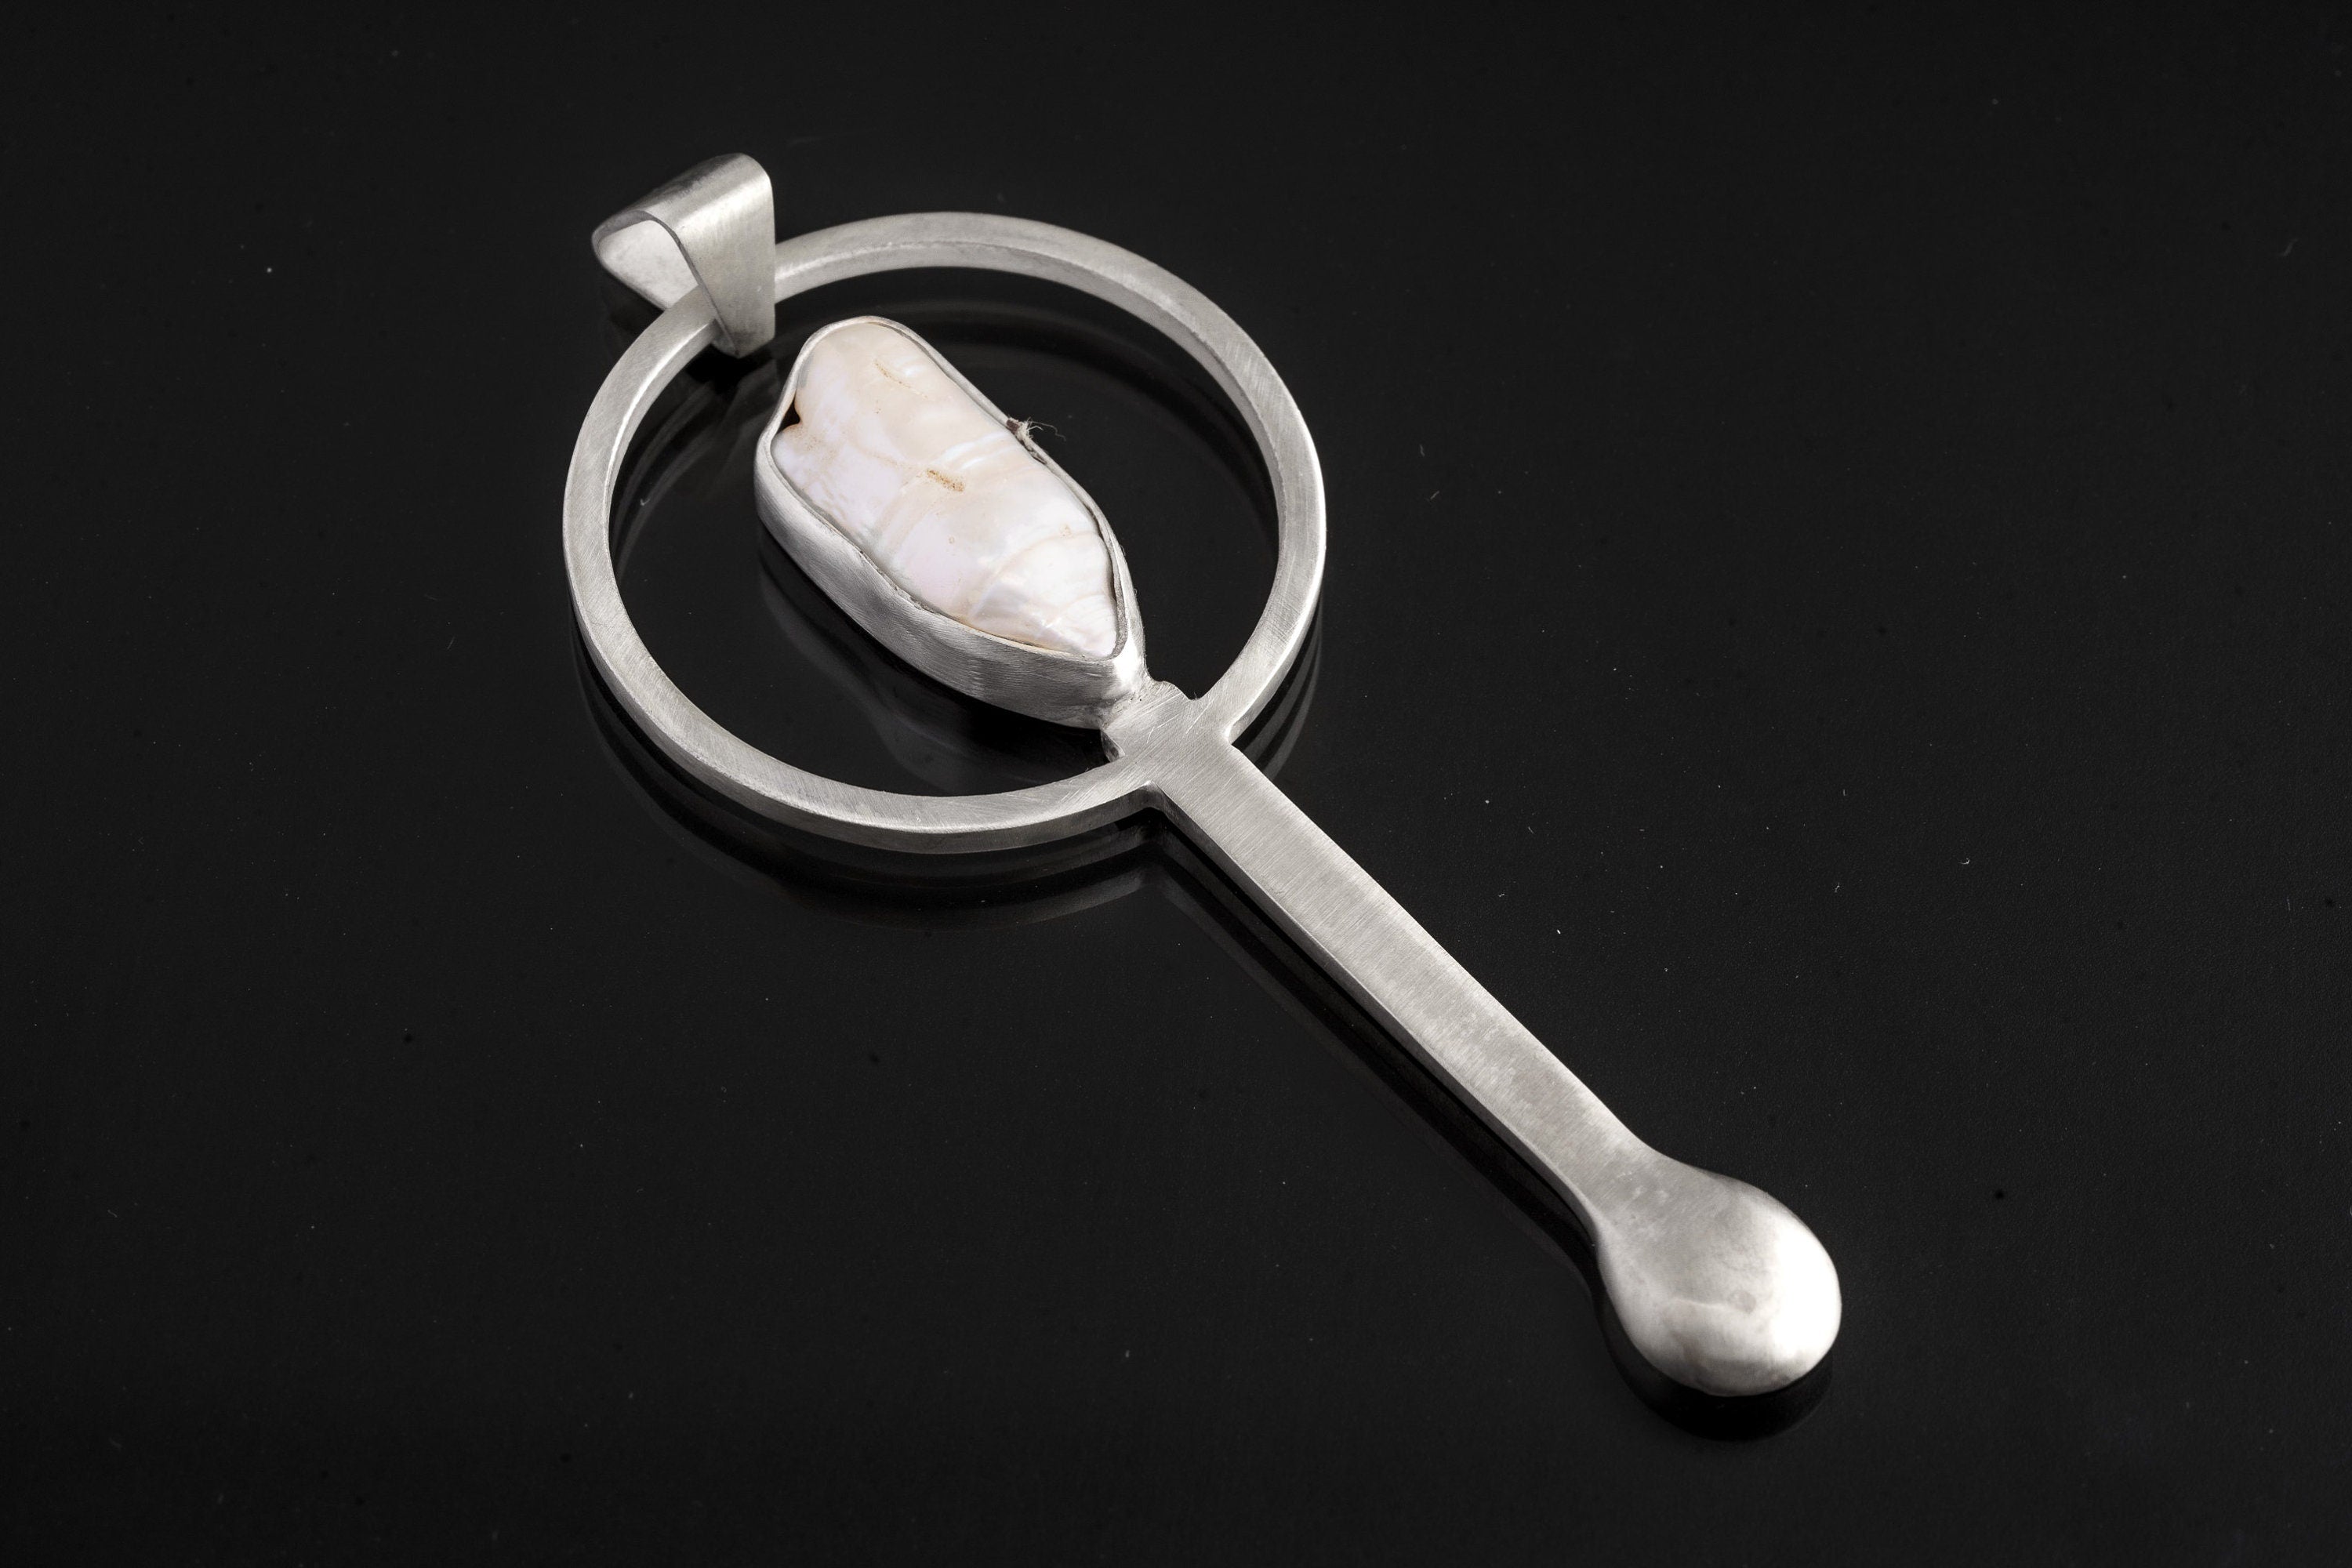 Large Pearl - Spice / Ceremonial Spoon - 925 Cast Silver - Unique Brush Textured - Crystal Pendant Necklace -